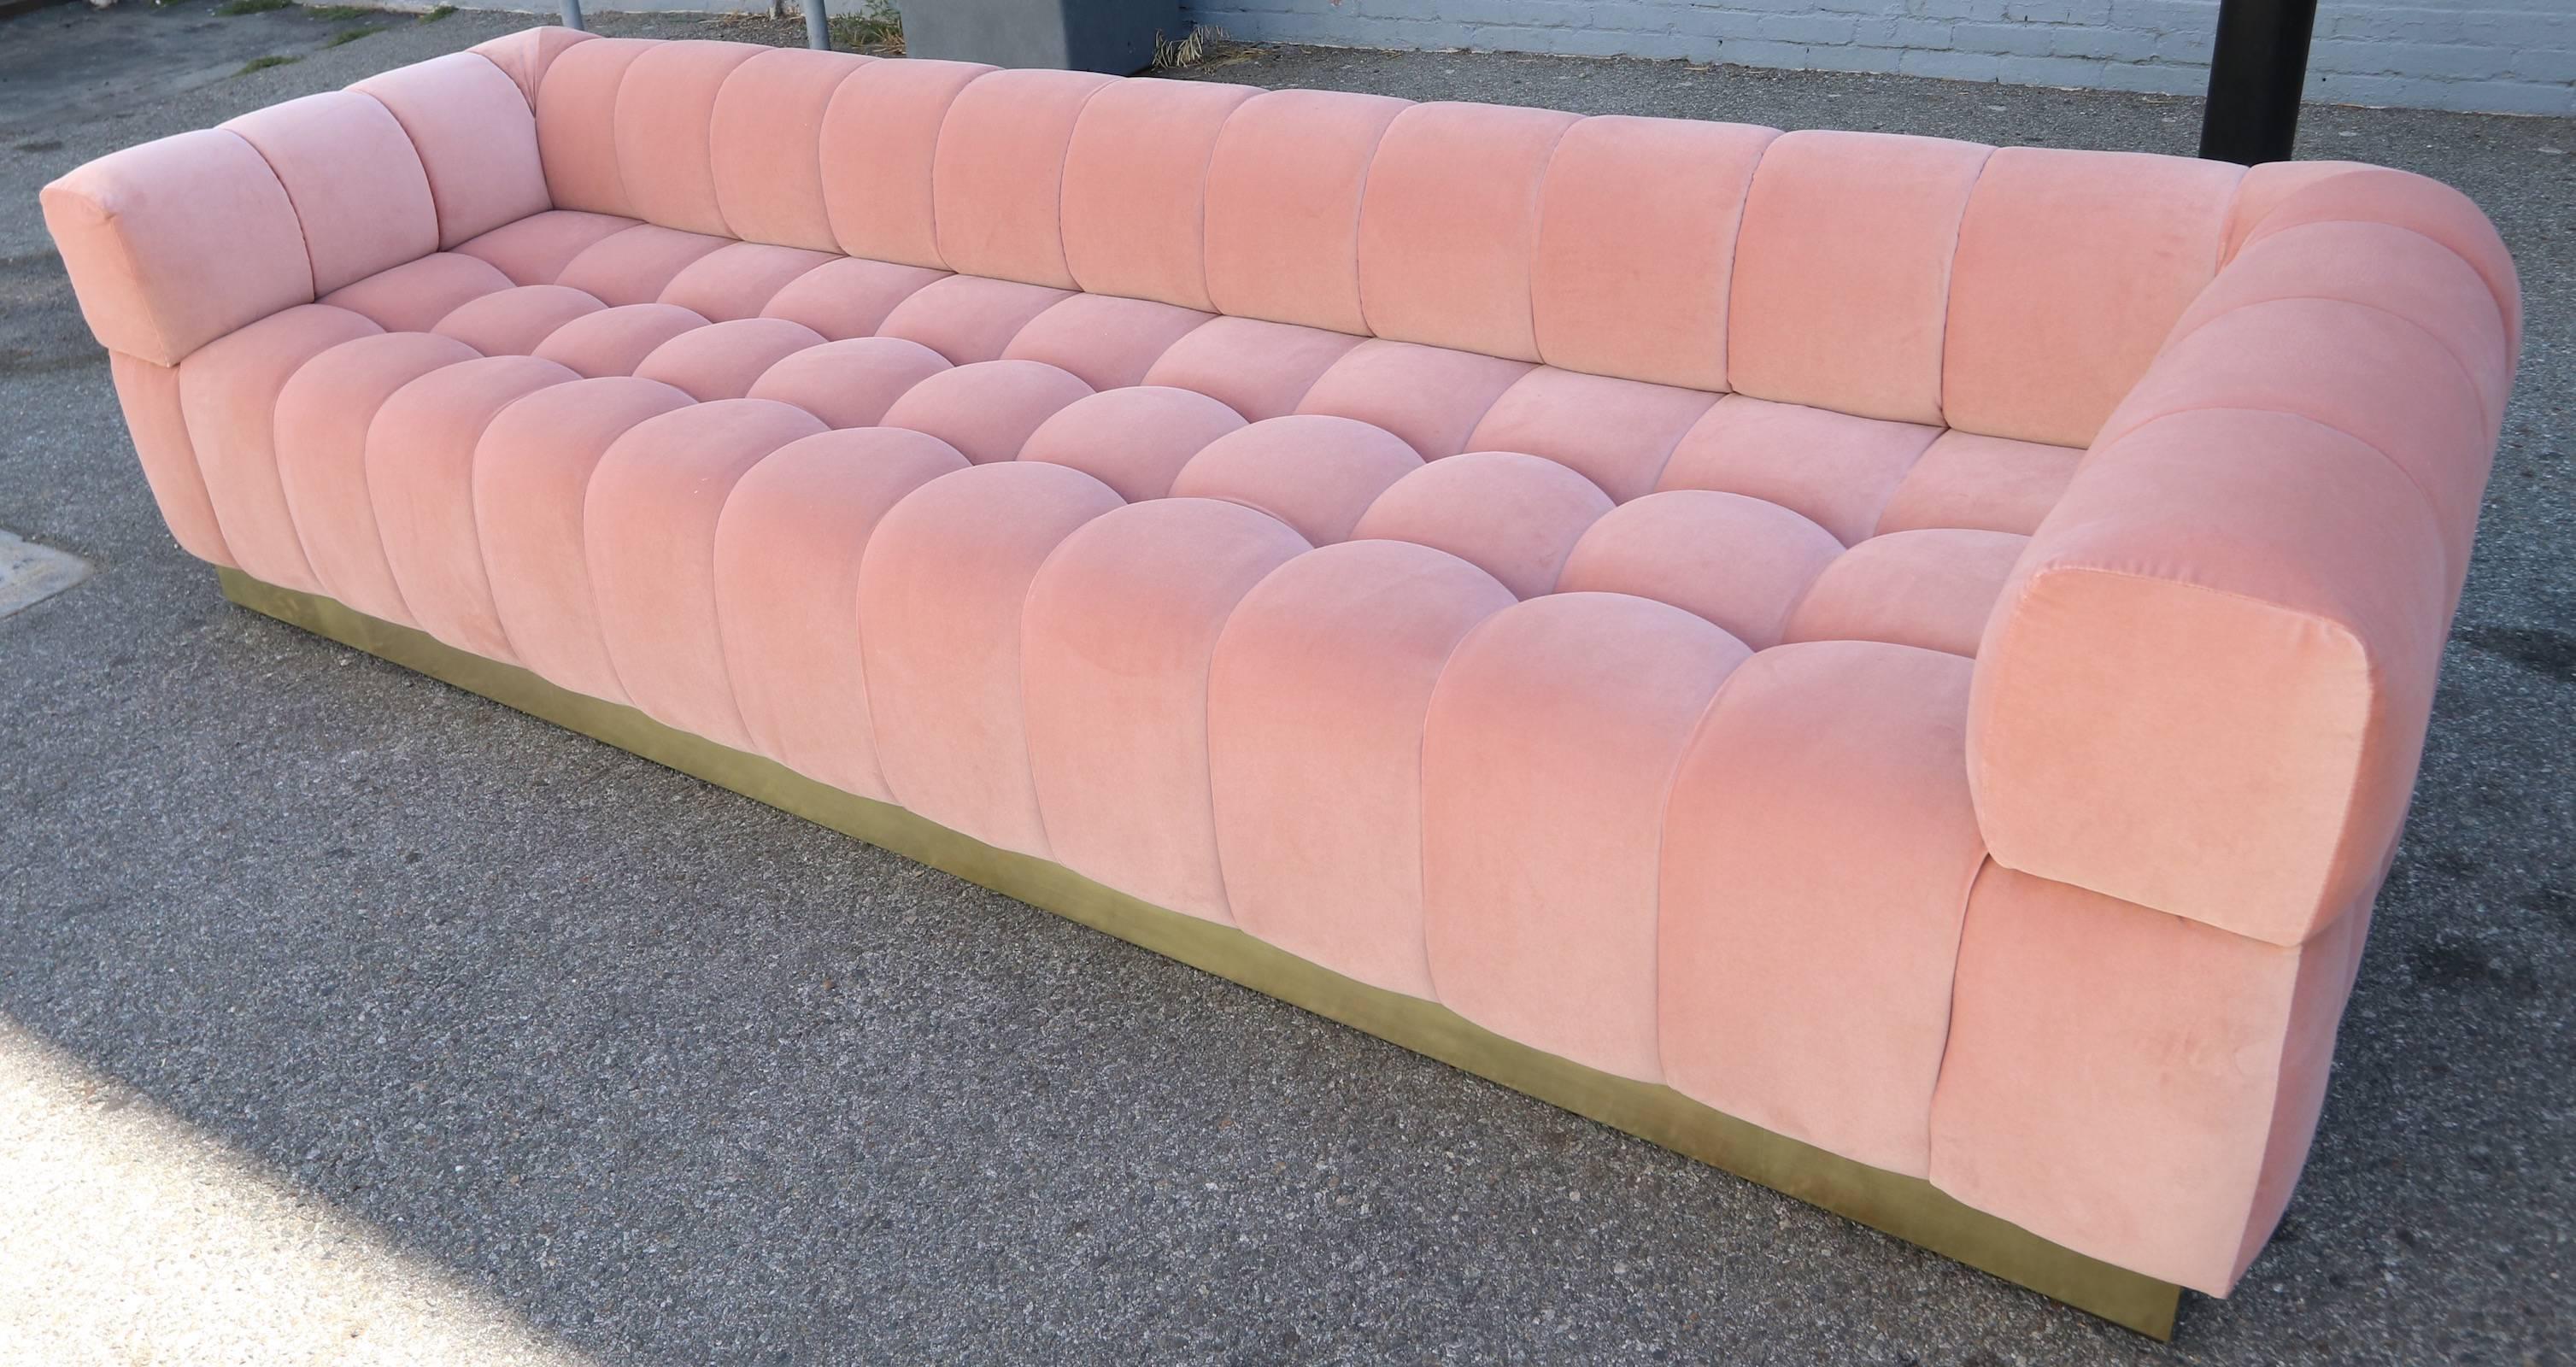 Custom tufted sofa with handmade brass base, in apricot pink velvet.  Made in Los Angeles by Adesso Imports. Can be made in different colors and fabrics or a different metal for the base.